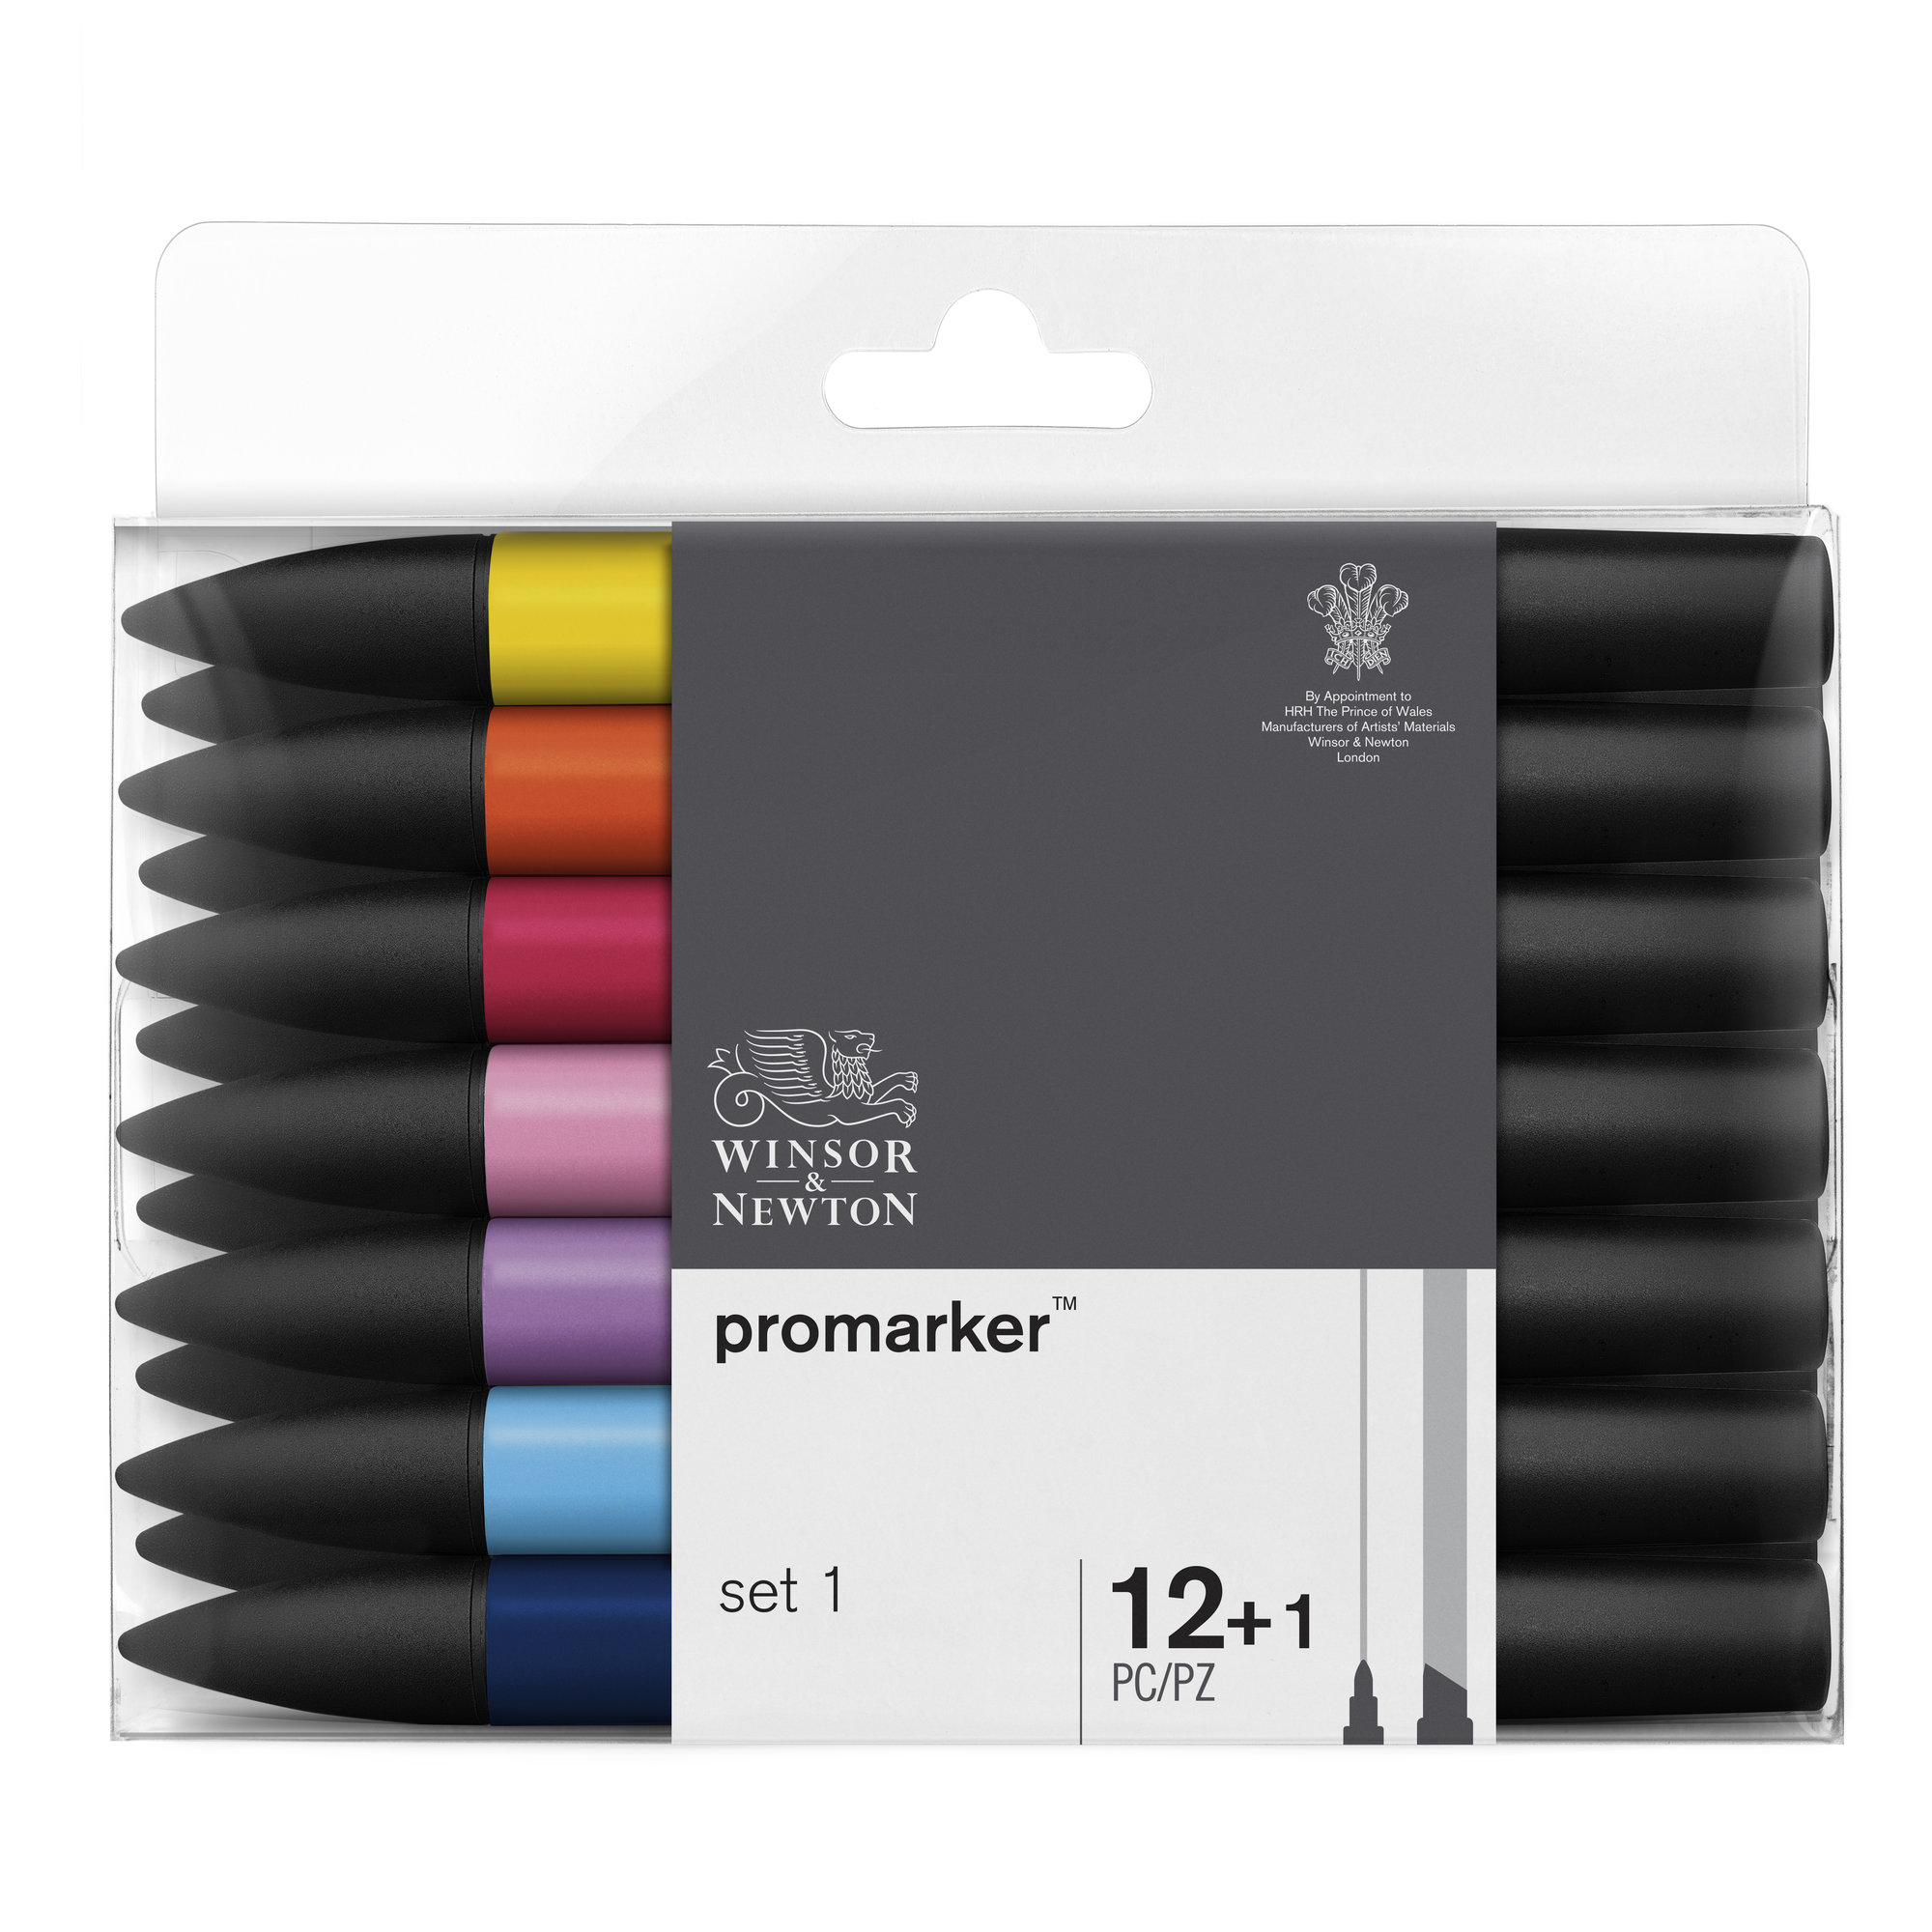 Winsor & Newton Promarker Graphic Drawing Pens 12+1 Markers Set 1